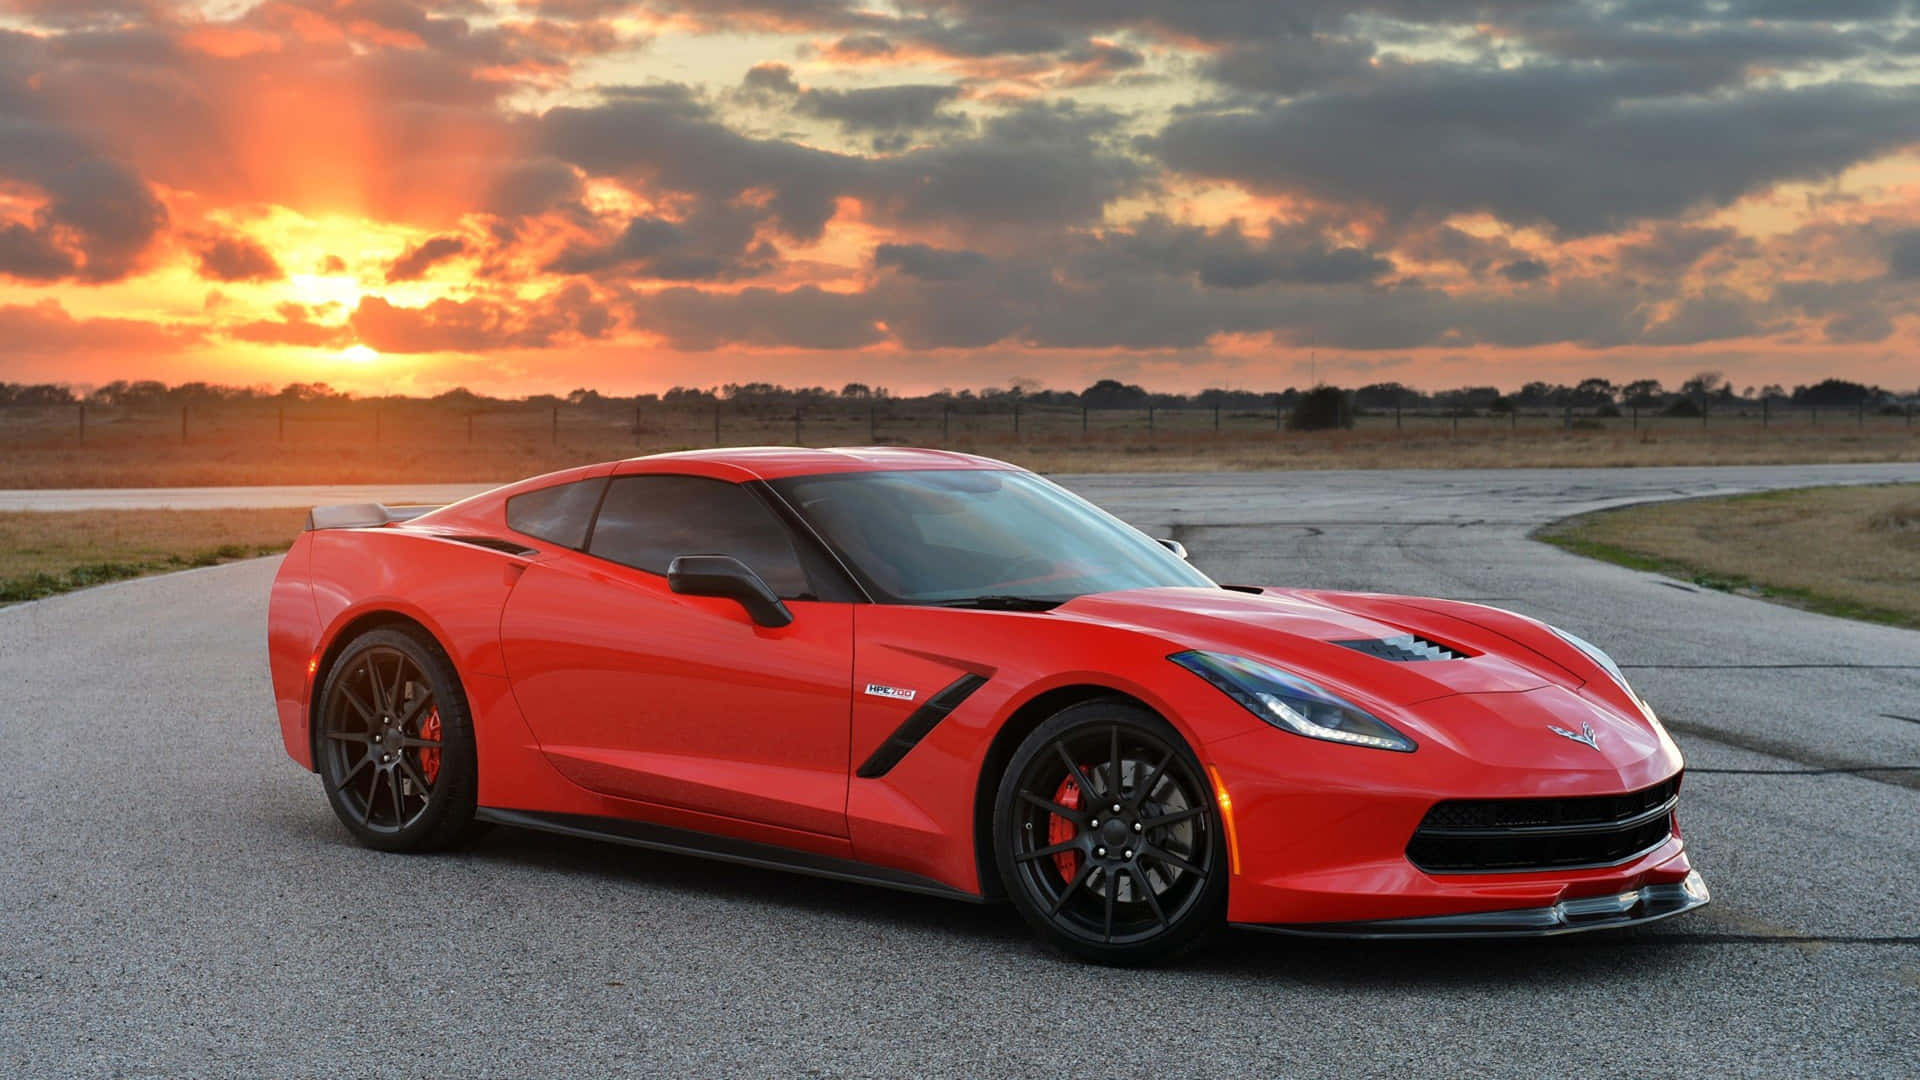 Stunning Red Chevrolet Corvette C7 - A Symphony Of Speed And Power Wallpaper